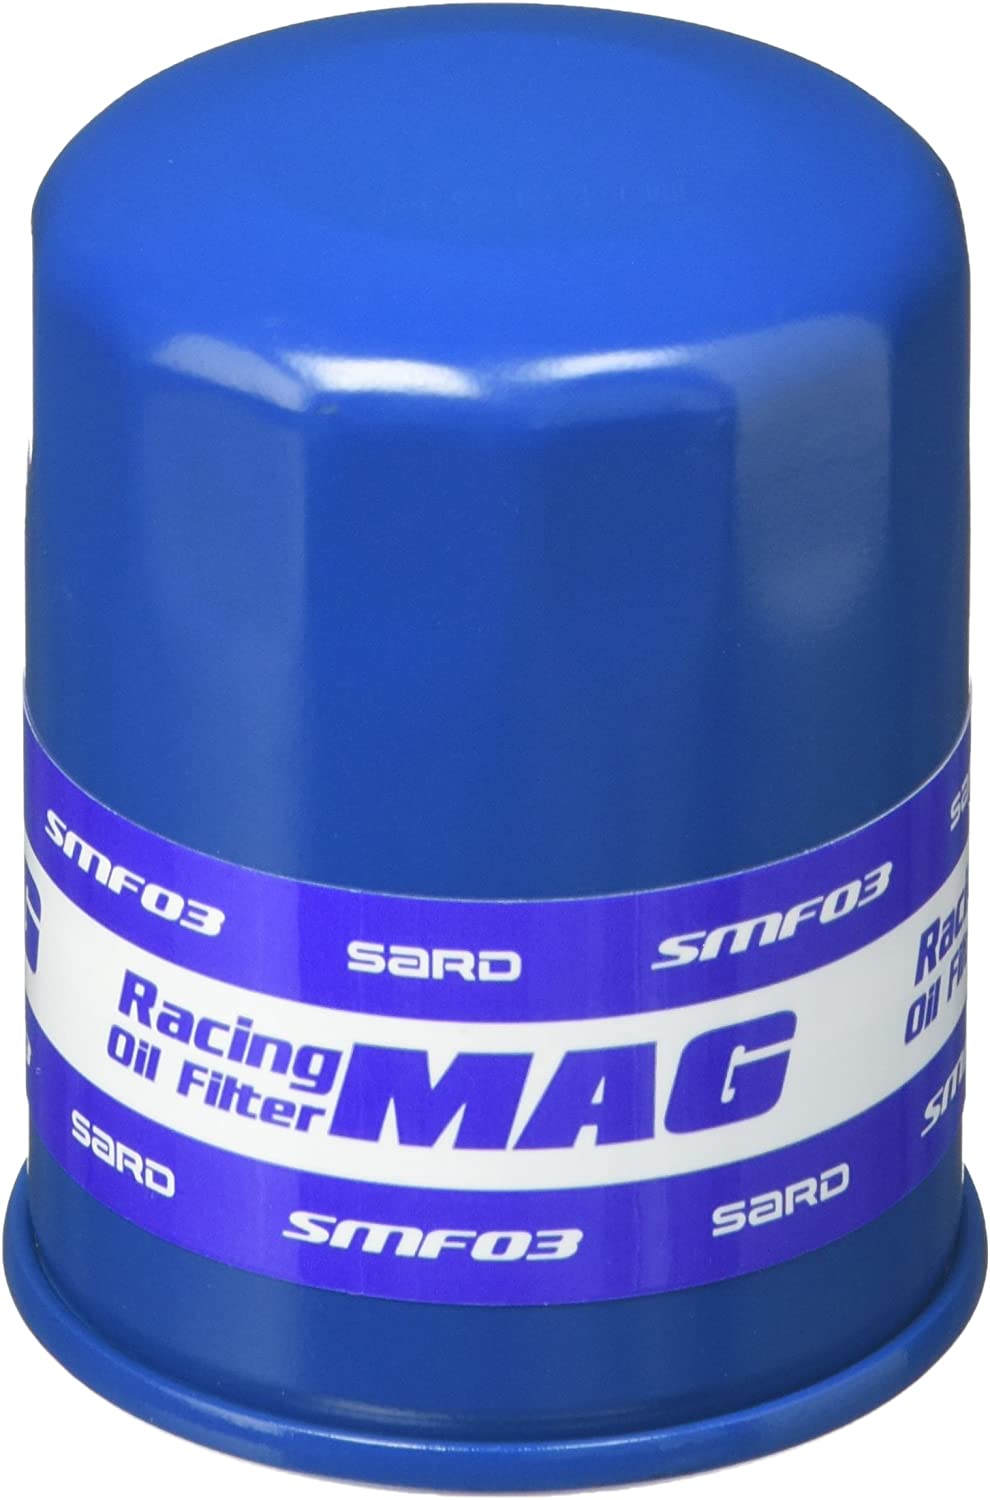 SARD RACING OIL FILTER For CELICA ZZT230 SMF00